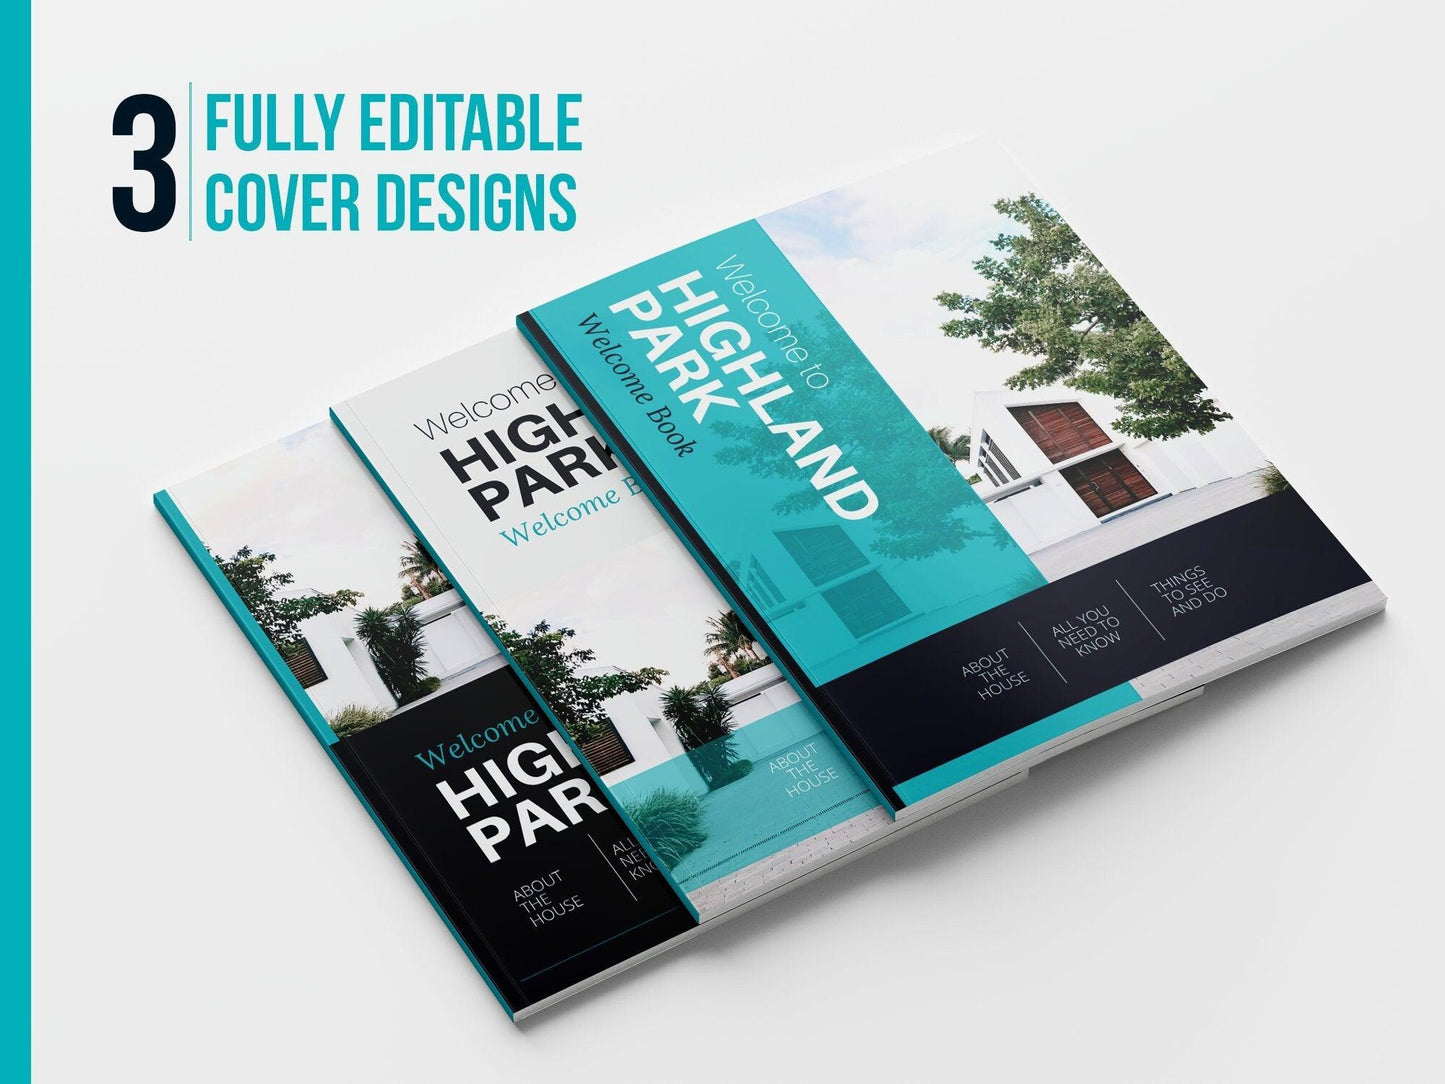 Airbnb Host Welcome Book Template (coastal)